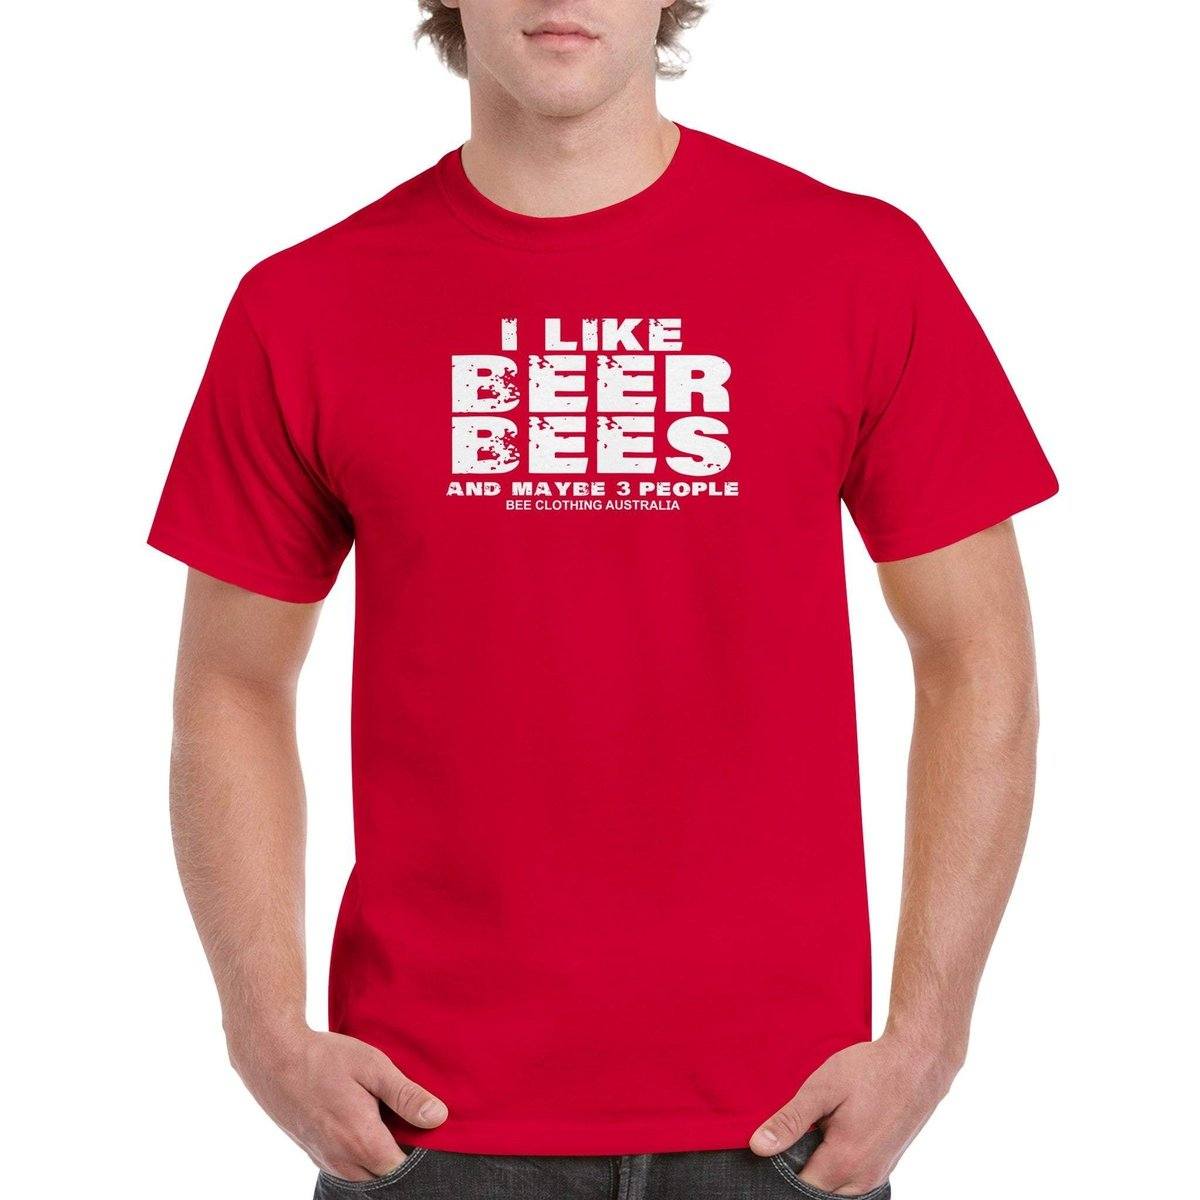 I Like Bees Beer And Maybe 3 People T-Shirt - beekeeper slogan Tshirt - Unisex Crewneck T-shirt Adults T-Shirts Unisex Red / S Bee Clothing Australia